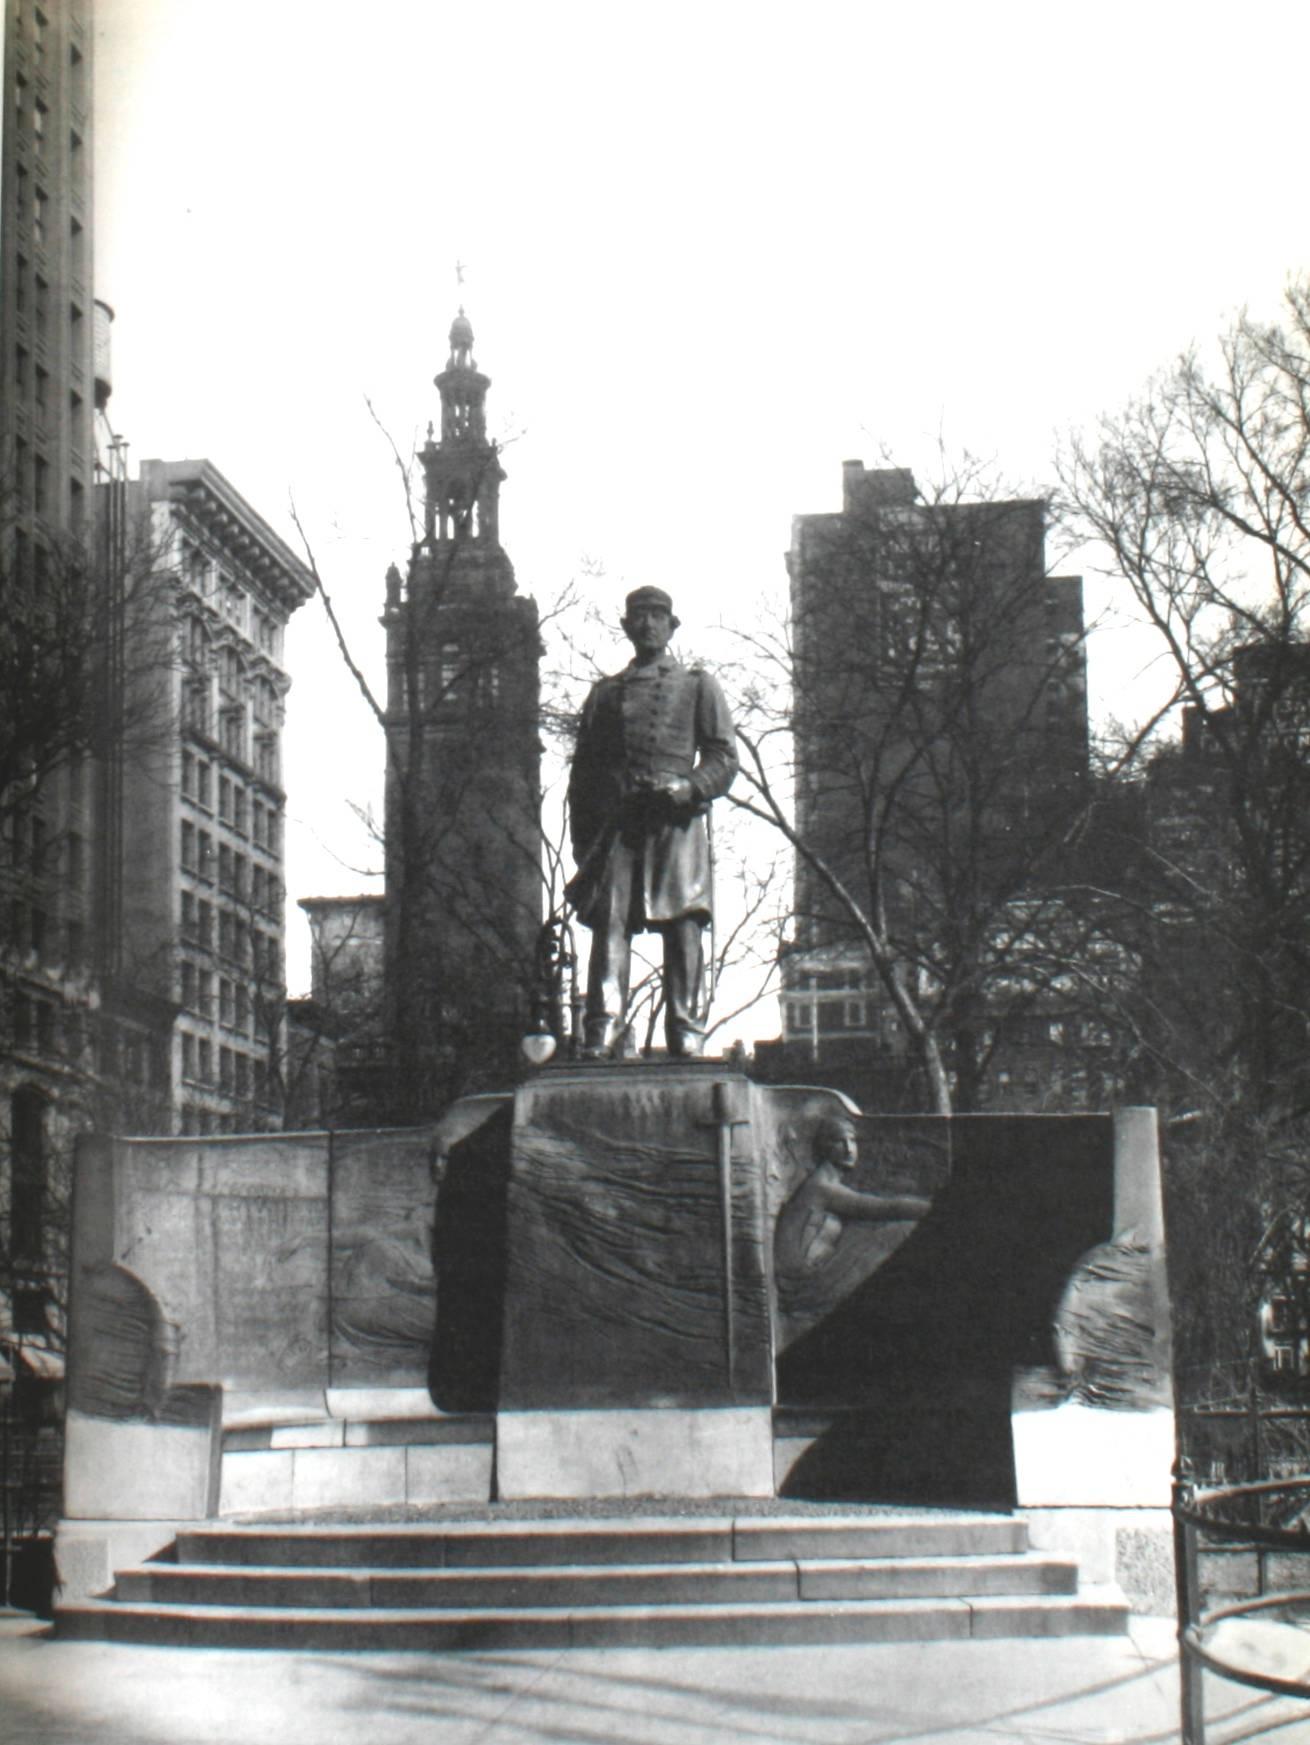 20th Century Monuments and Masterpieces Histories and Views of Public Sculpture in NYC 1st Ed For Sale